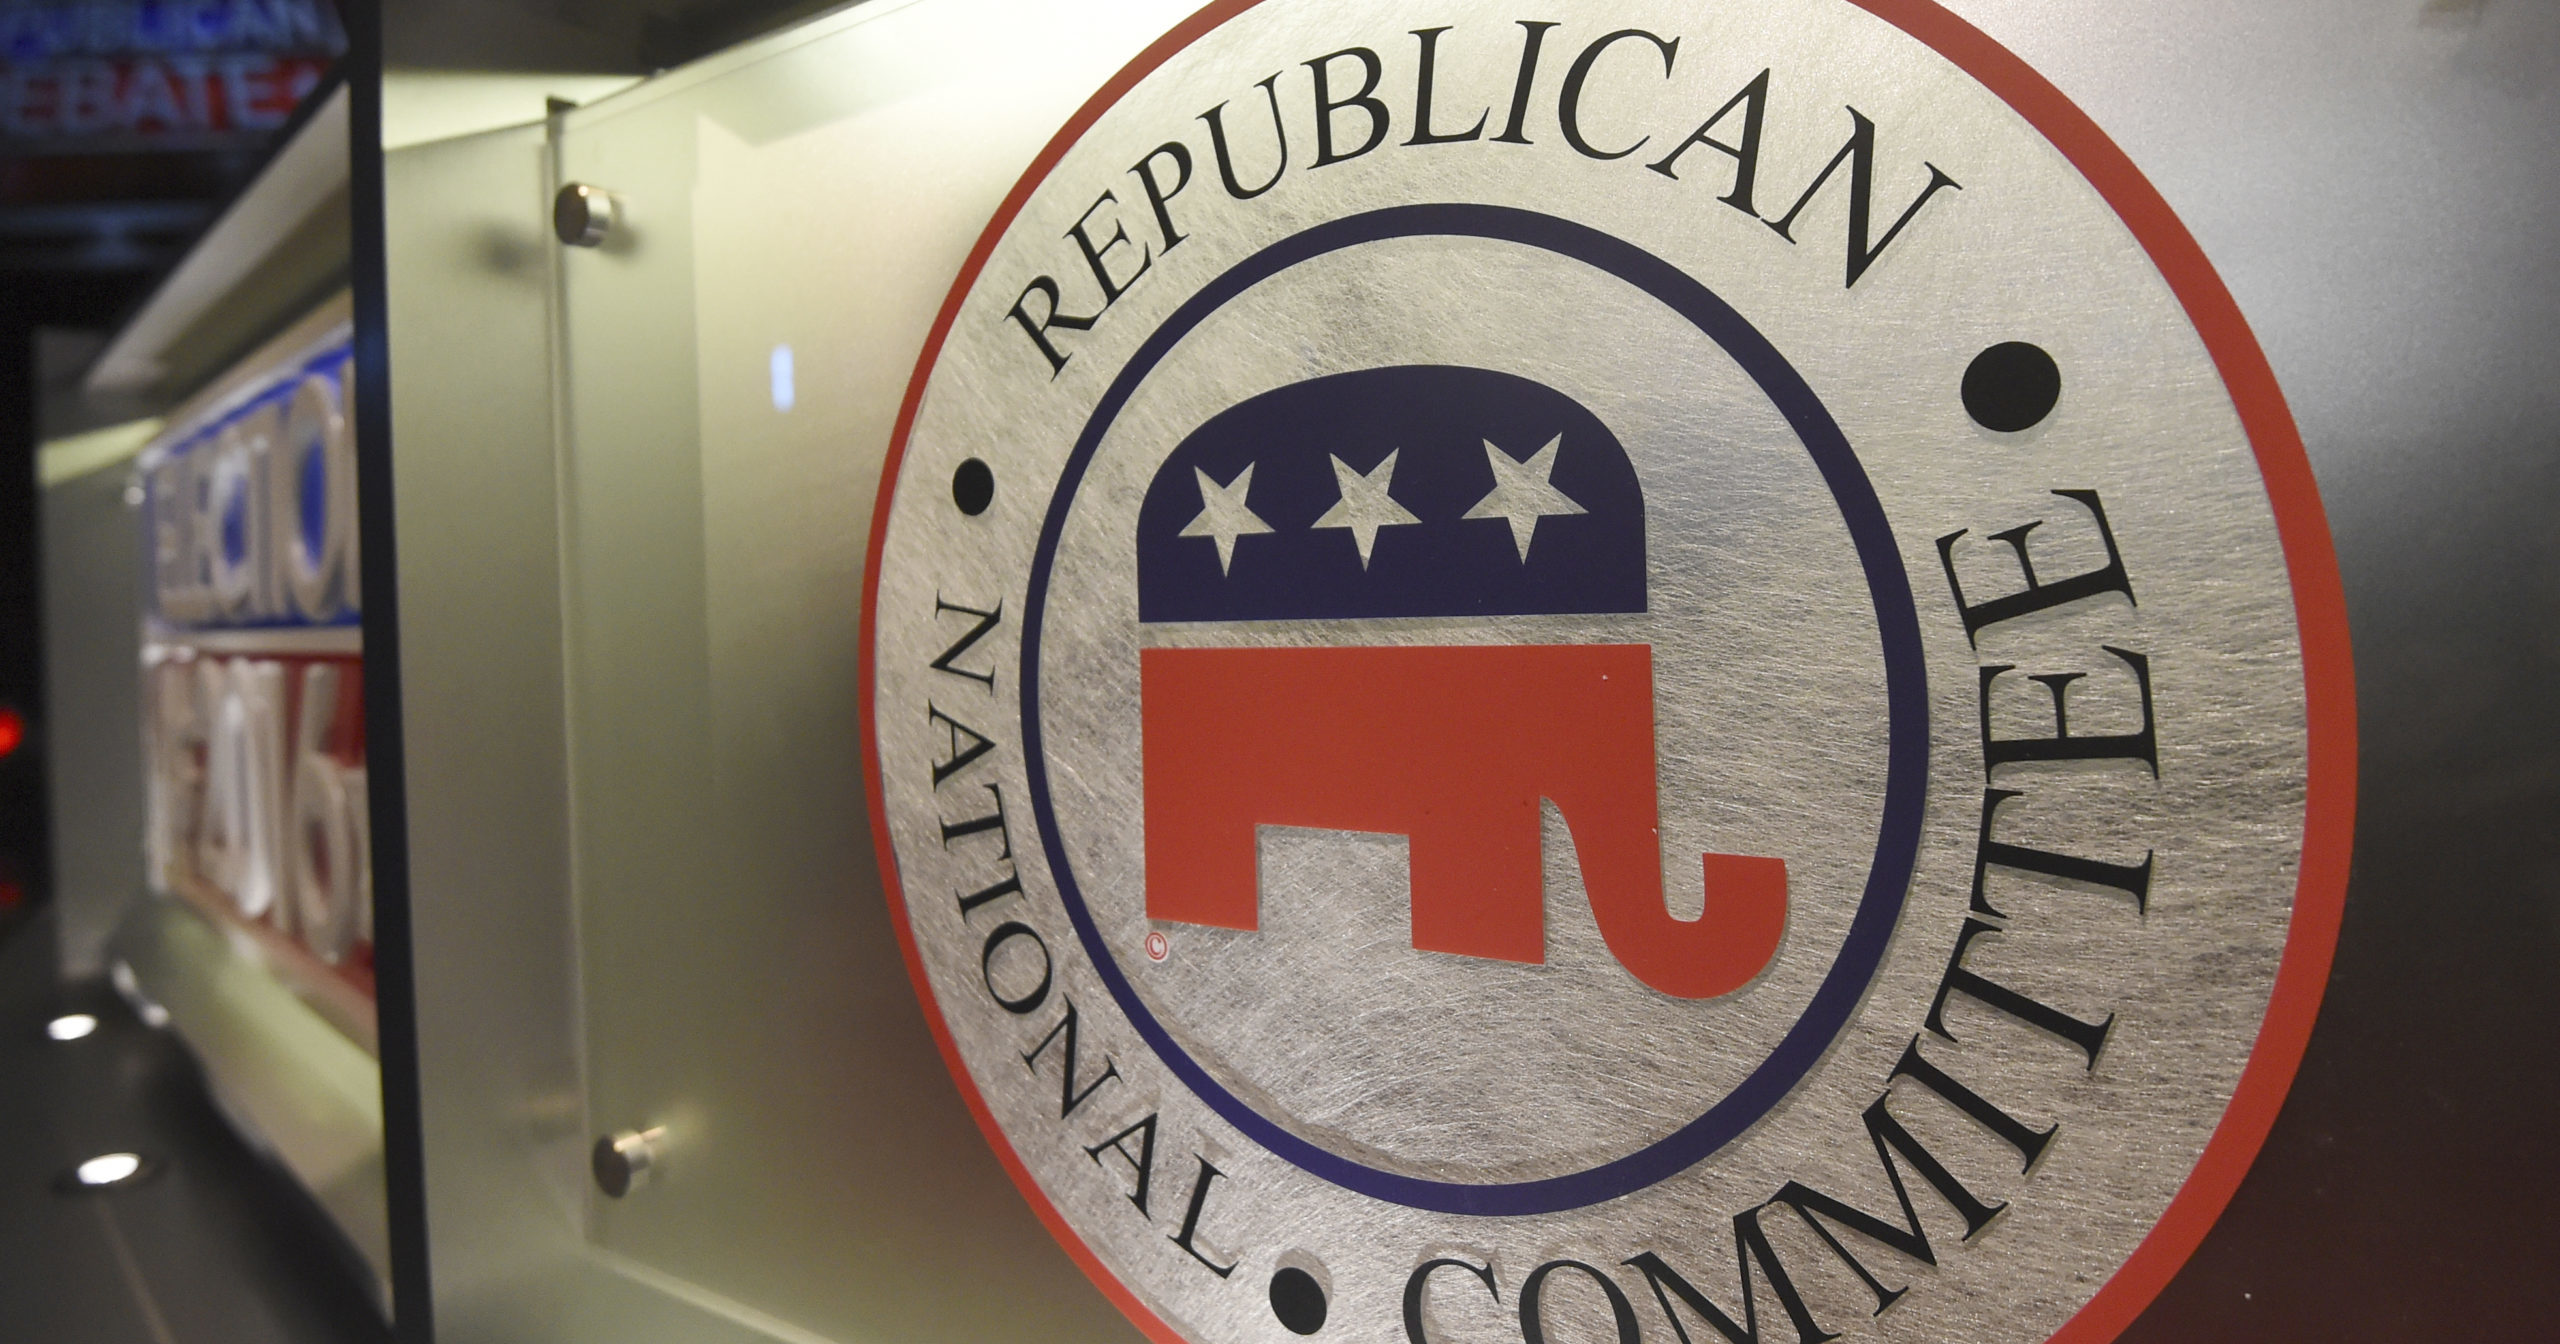 The Republican National Committee logo is shown on the stage as crew members work at the North Charleston Coliseum in North Charleston, South Carolina, on Jan. 13, 2016.